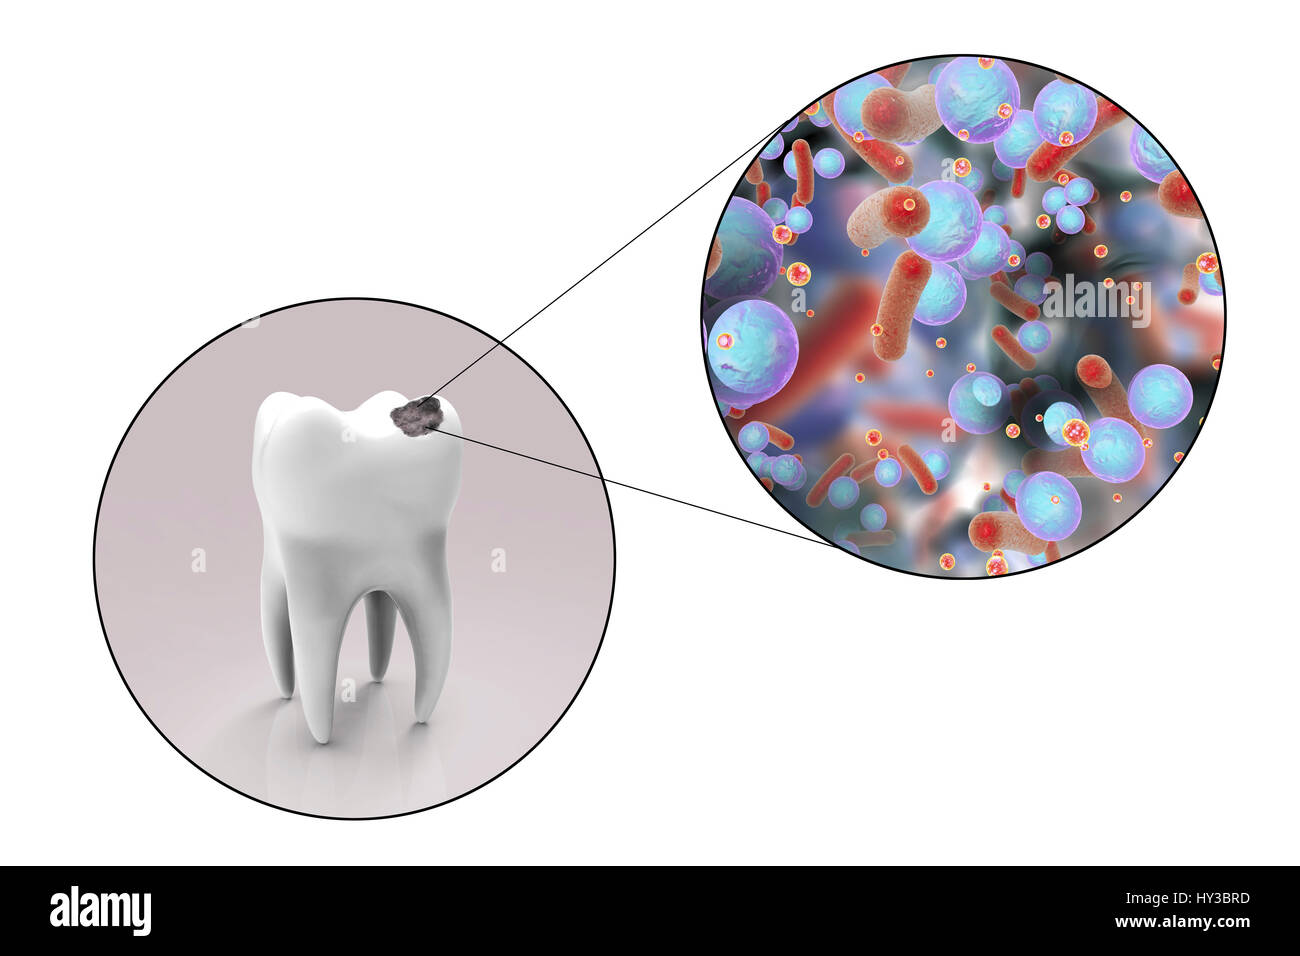 Tooth decay. Computer illustration of a tooth with a cavity and a close-up view of the bacteria that cause caries formation. Stock Photo